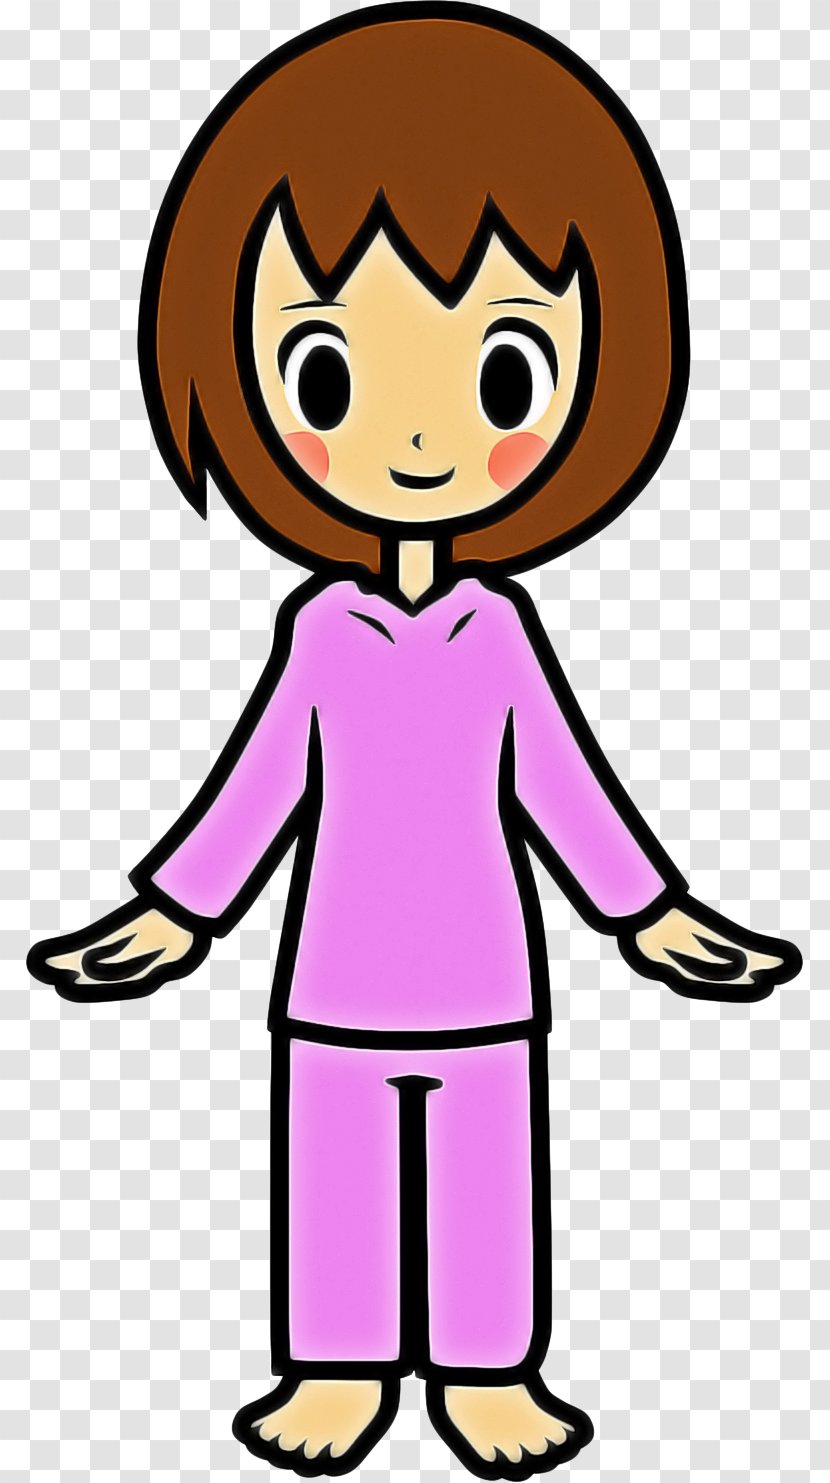 Girl Cartoon - Smile - Style Happy Transparent PNG